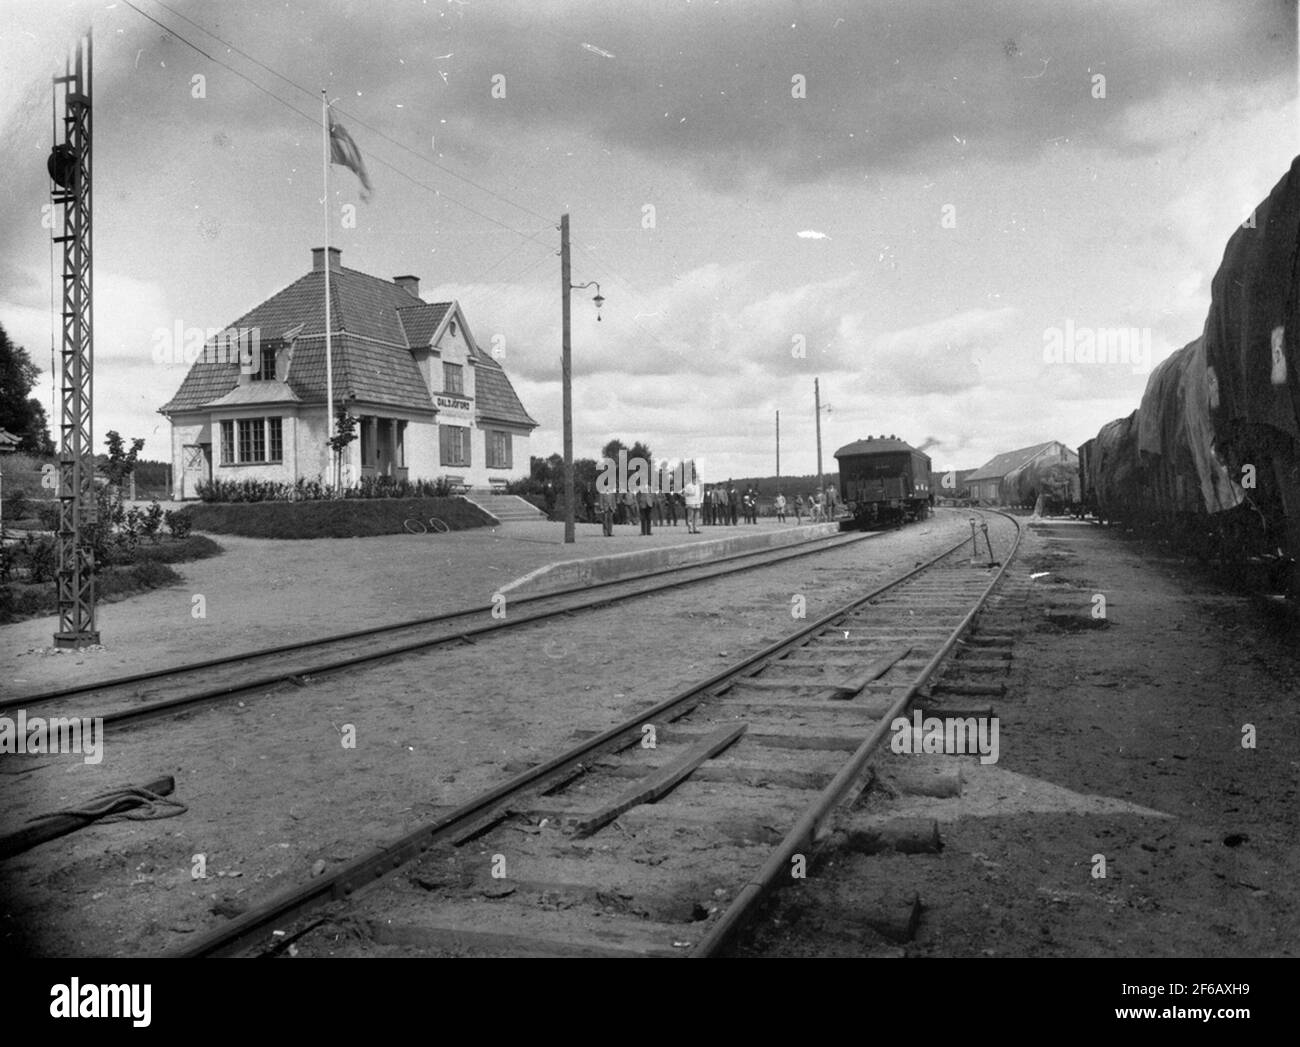 The railway station in Dalsjöfors, landscaped by Borås - Ulricehamn Railway 1917. The station house was demolished and replaced with a bus for 1982. Stock Photo